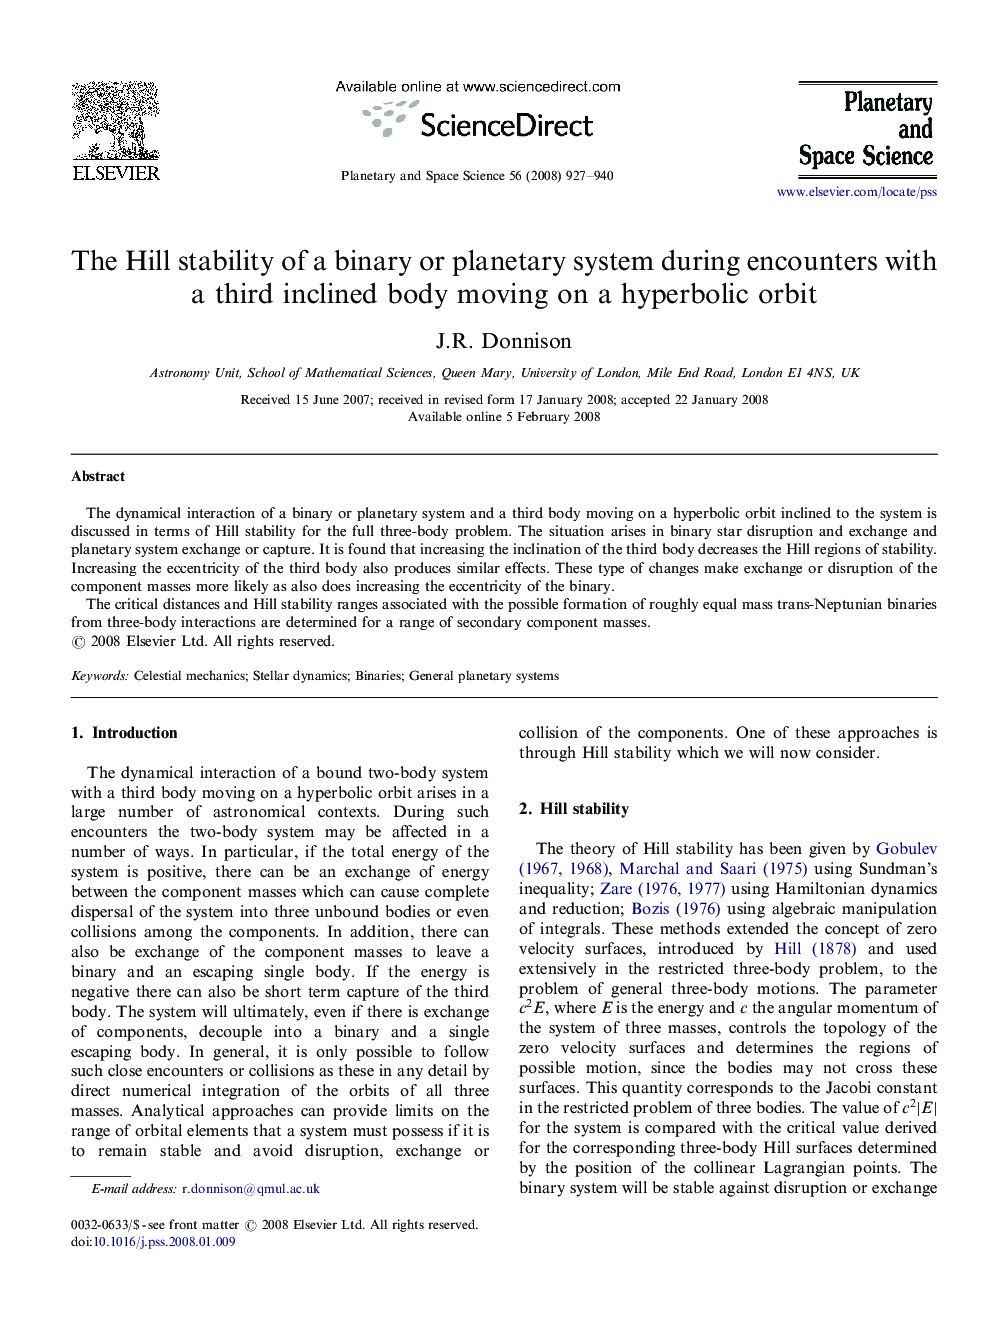 The Hill stability of a binary or planetary system during encounters with a third inclined body moving on a hyperbolic orbit